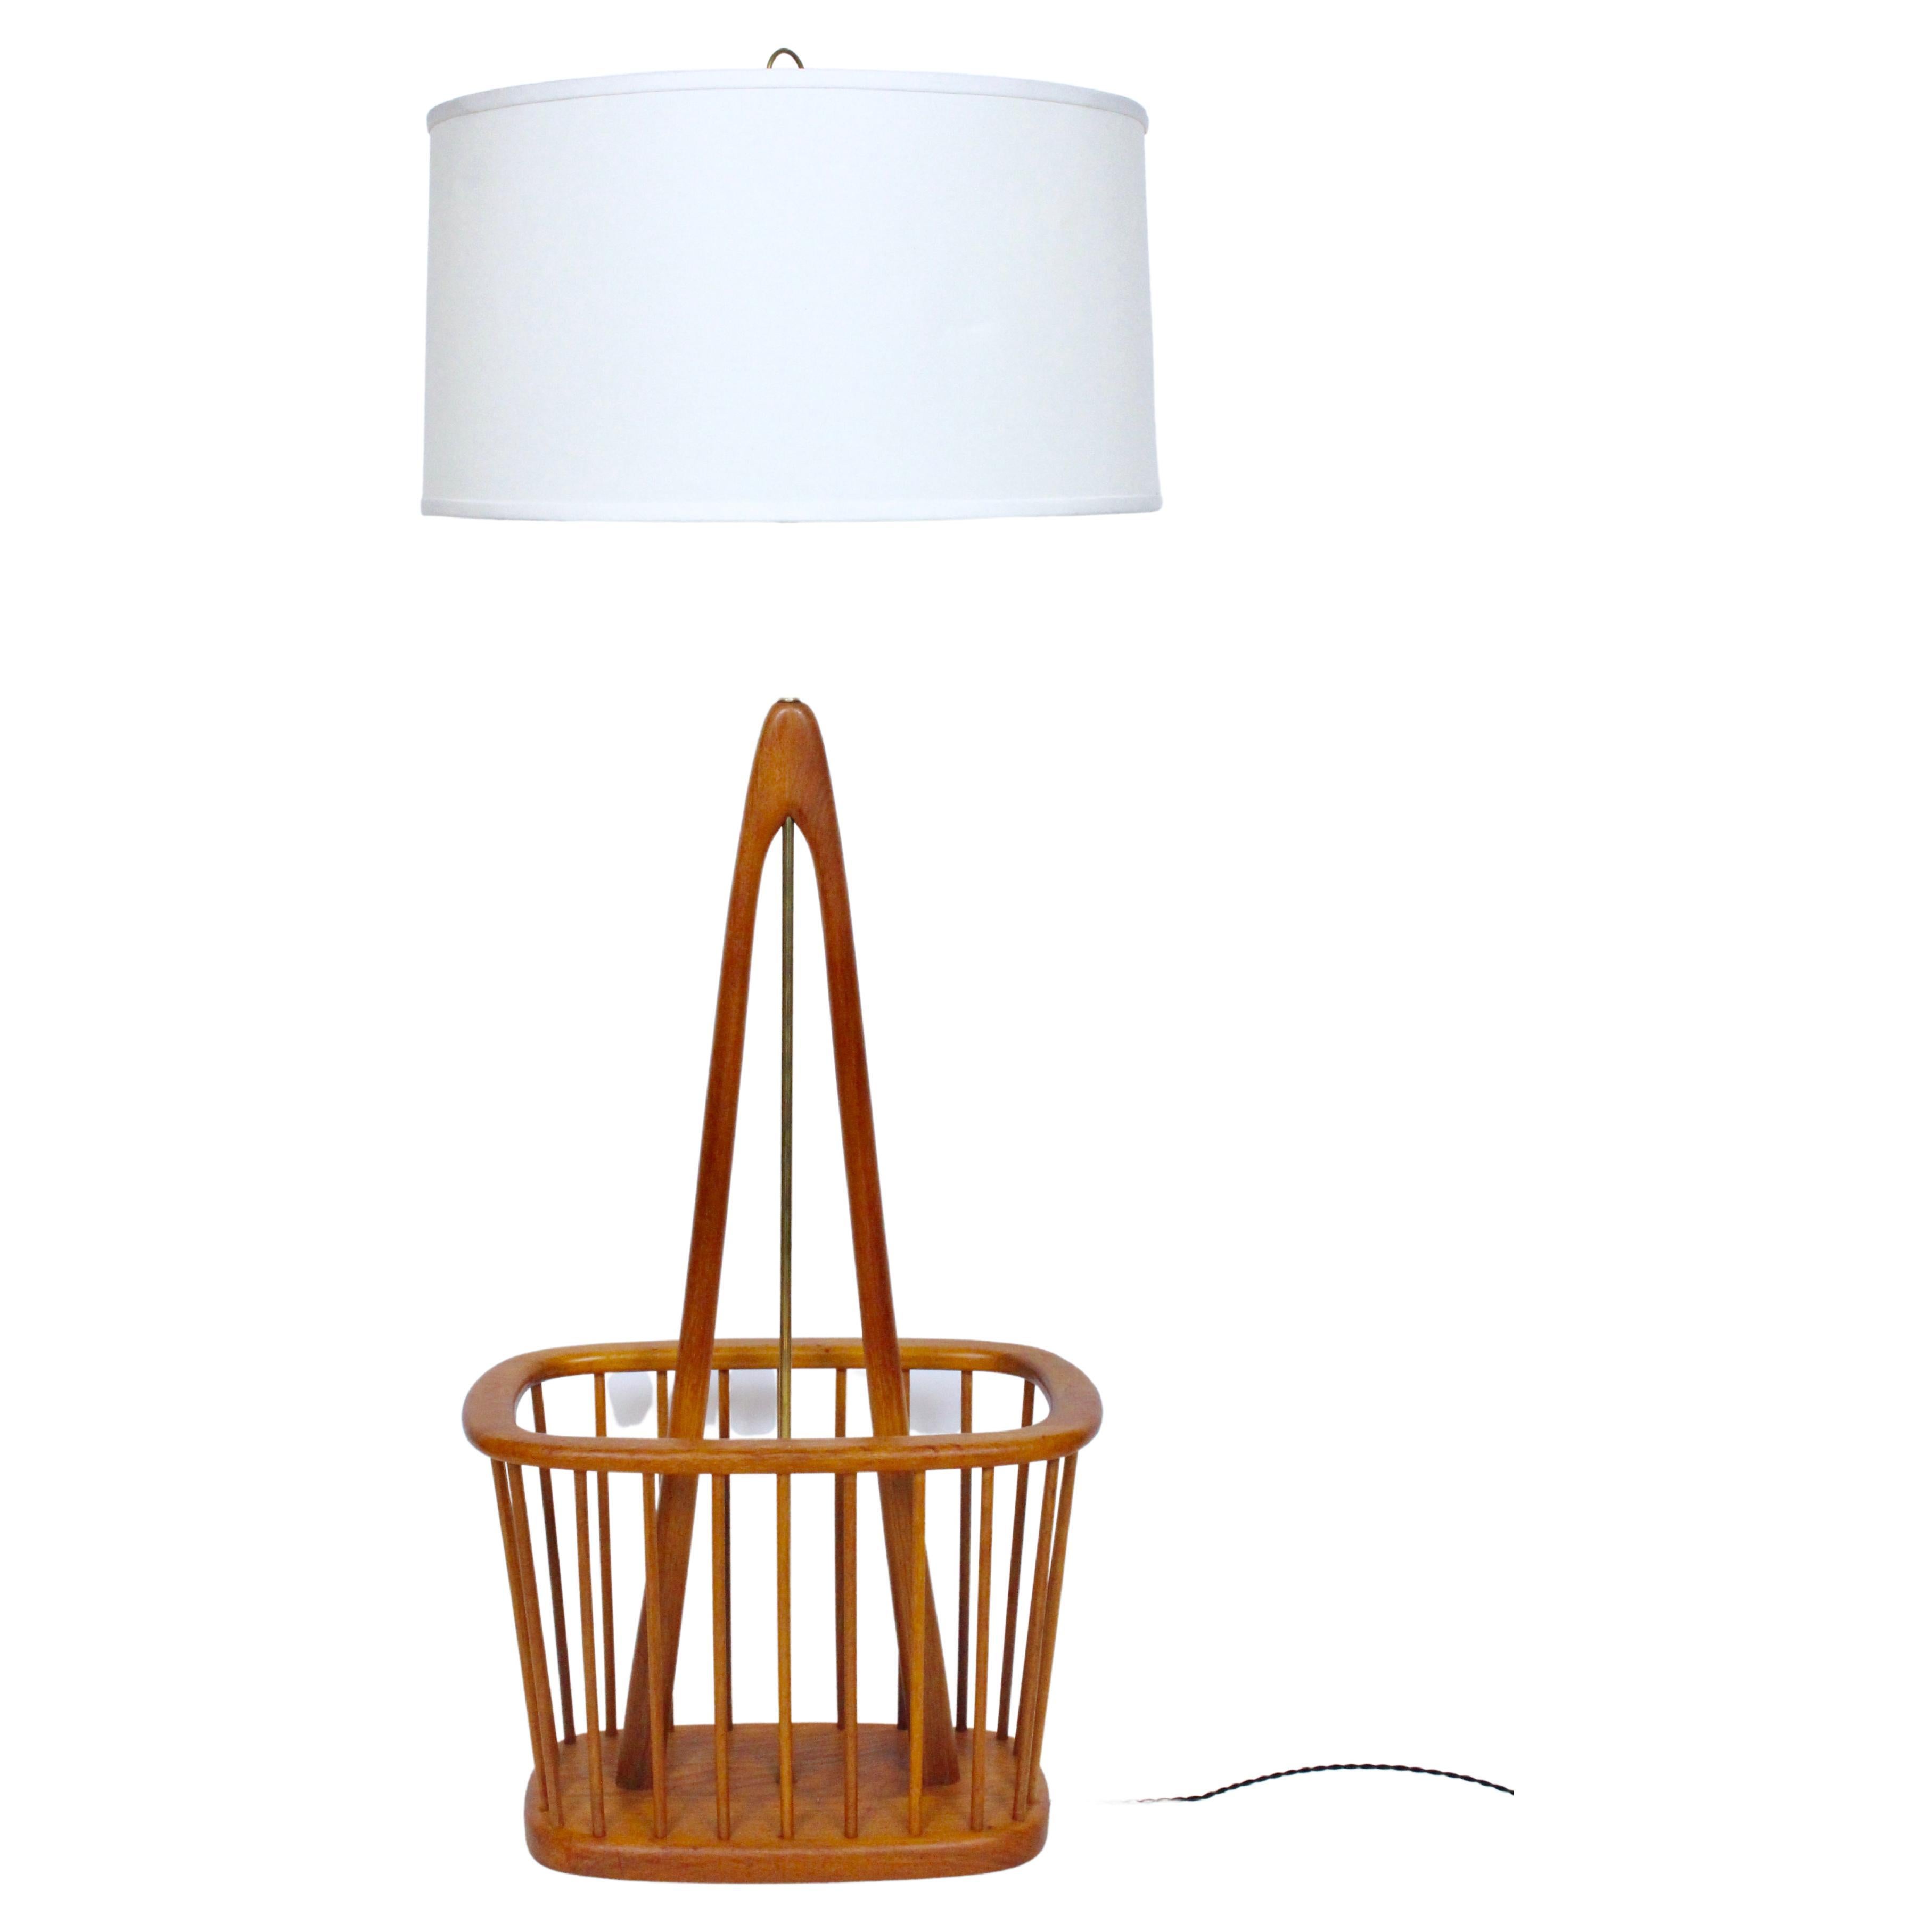 Sculptural Arthur Umanoff attributed teak and brass floor lamp. Featuring a turned Teak wishbone form,versatile oval rimmed (14H) Magazine Stand, turned teak spindle surround with Brass column and hardware. 47H to top of socket. Shade shown for